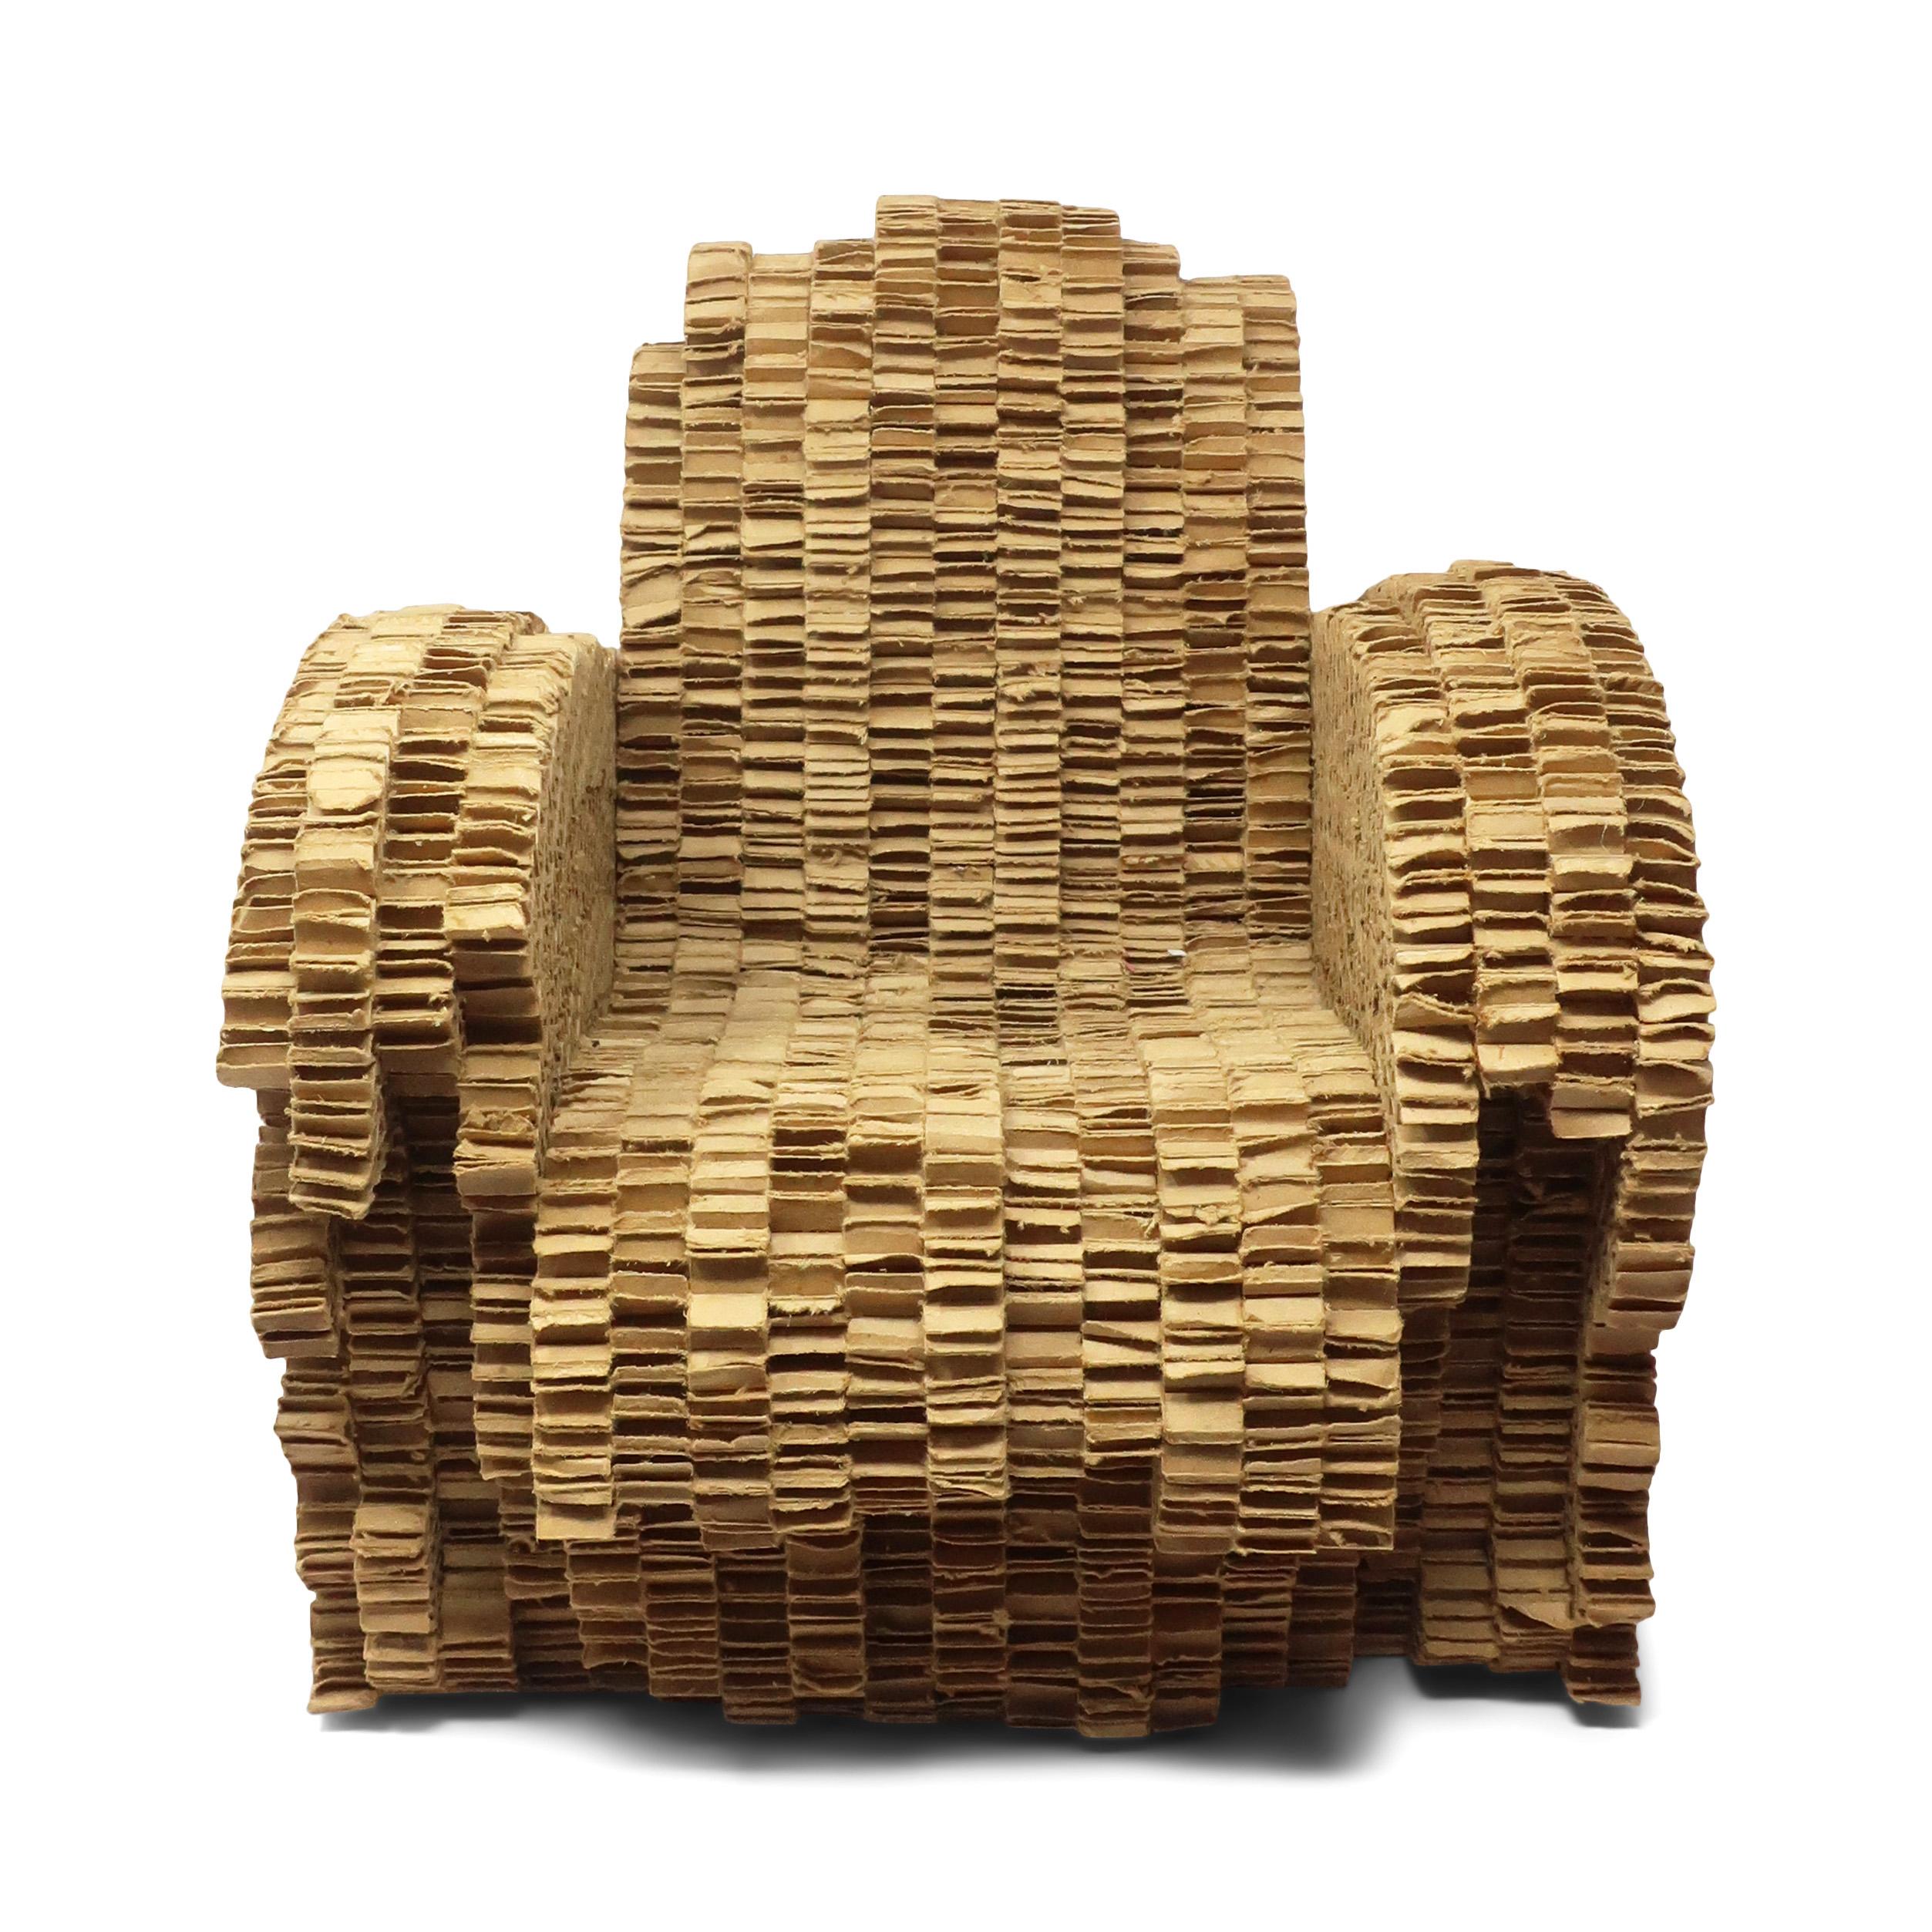 Little Beaver by Frank O. Gehry for Edition Vitra Design Museum 2